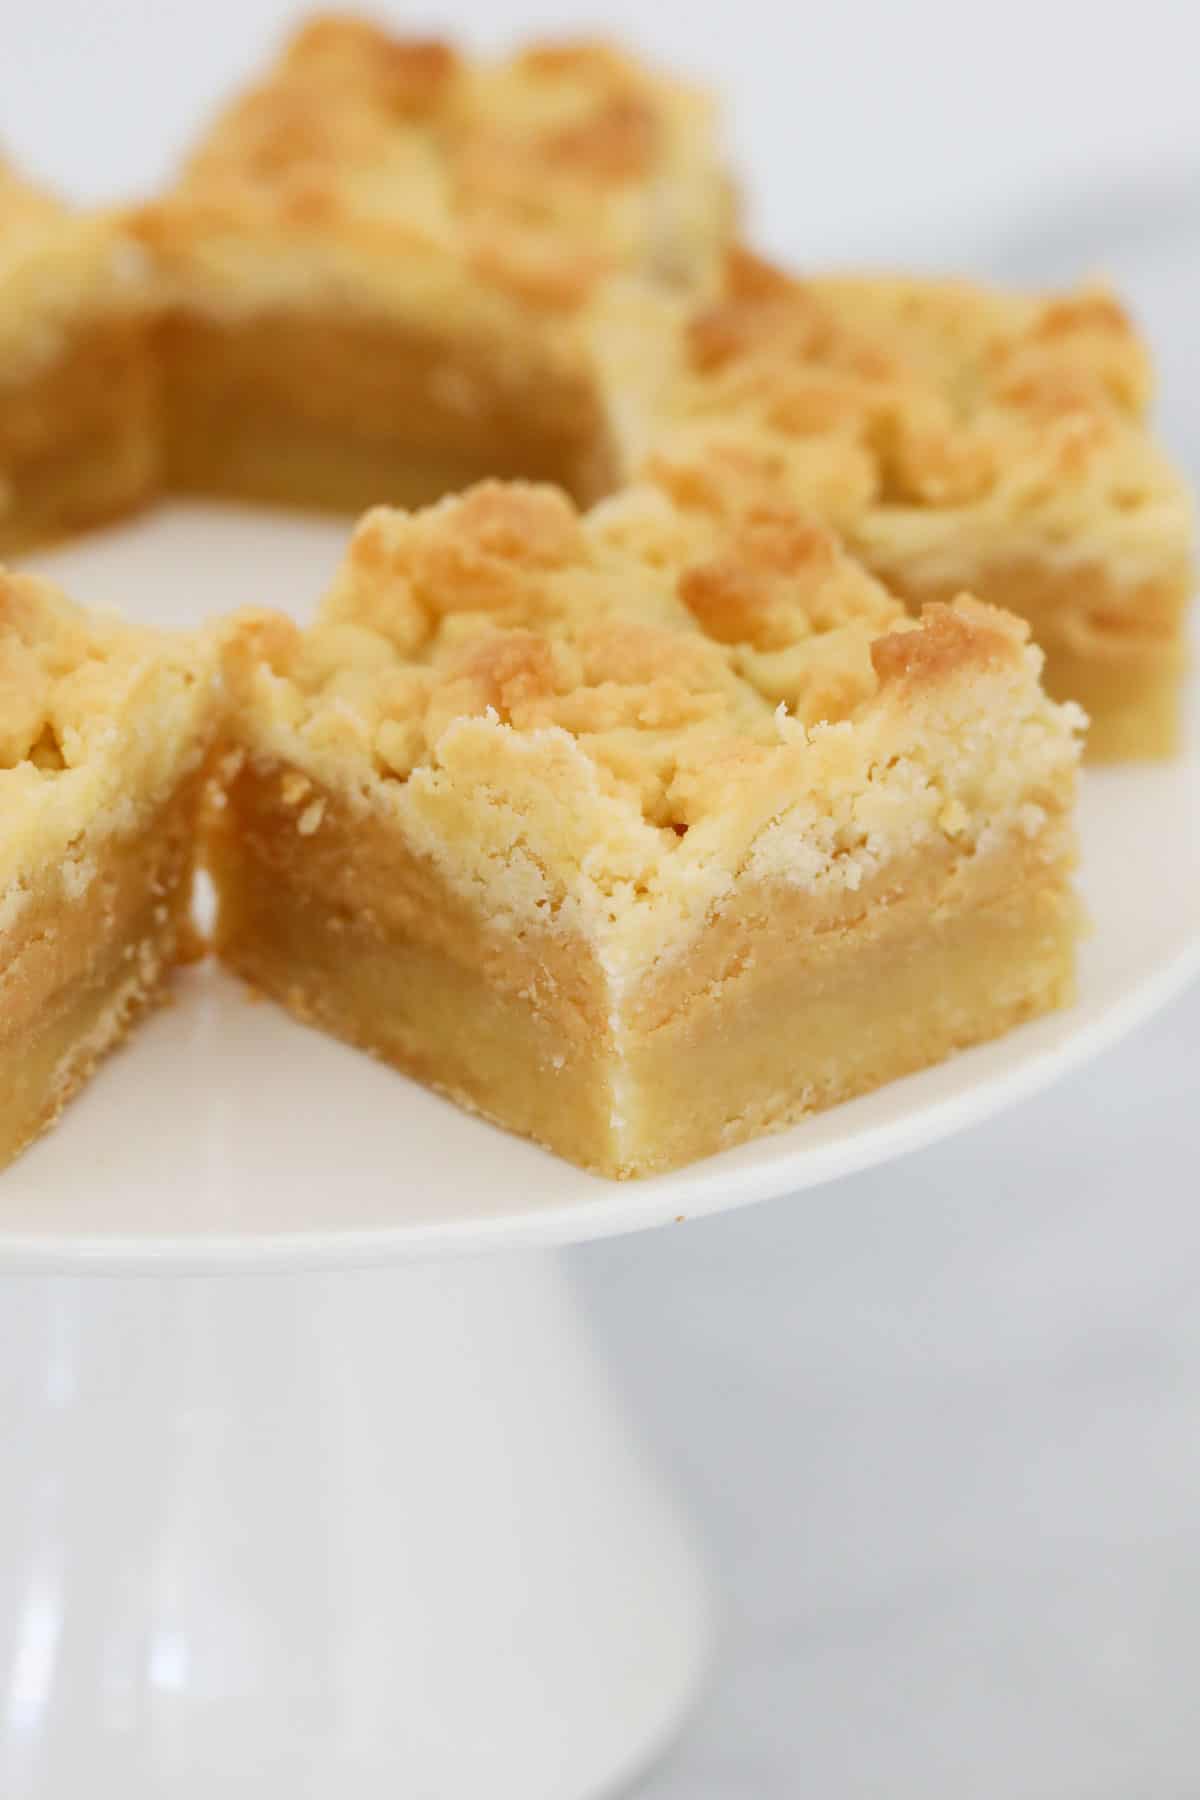 Tan Slice squares showing a rich caramel filling.